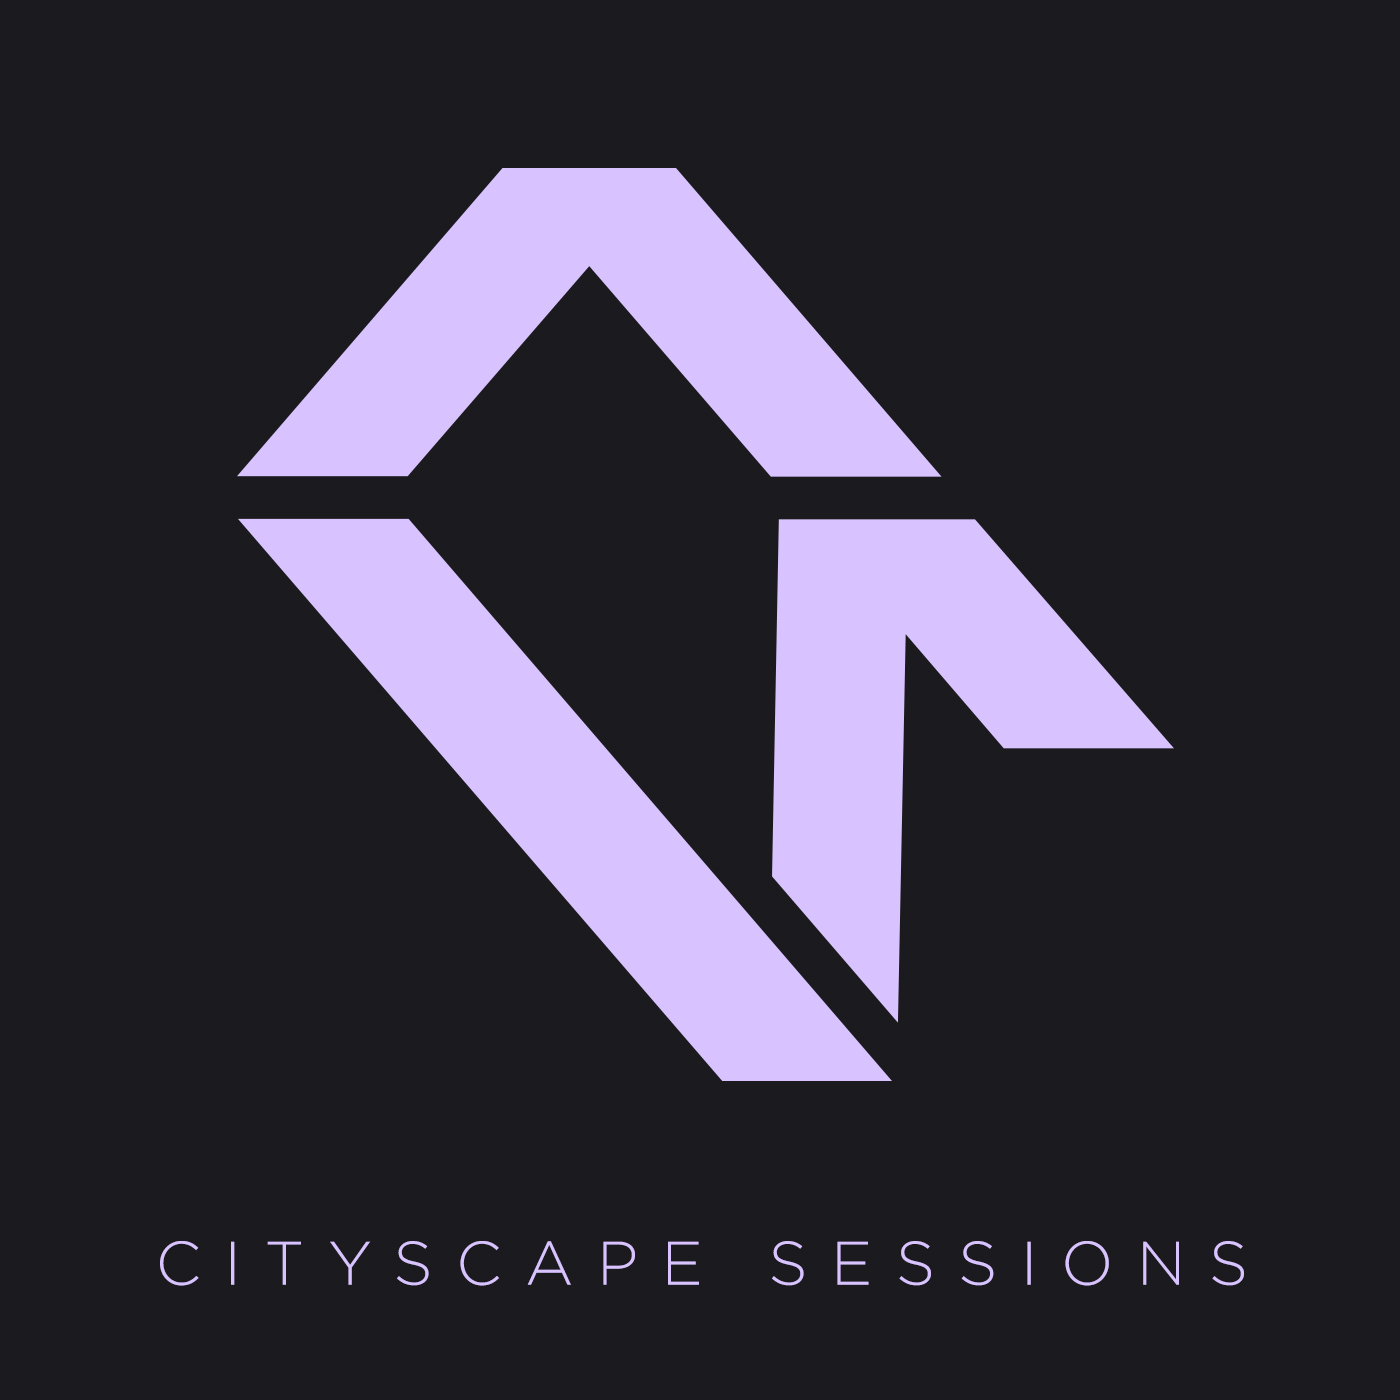 Cityscape Sessions banner logo